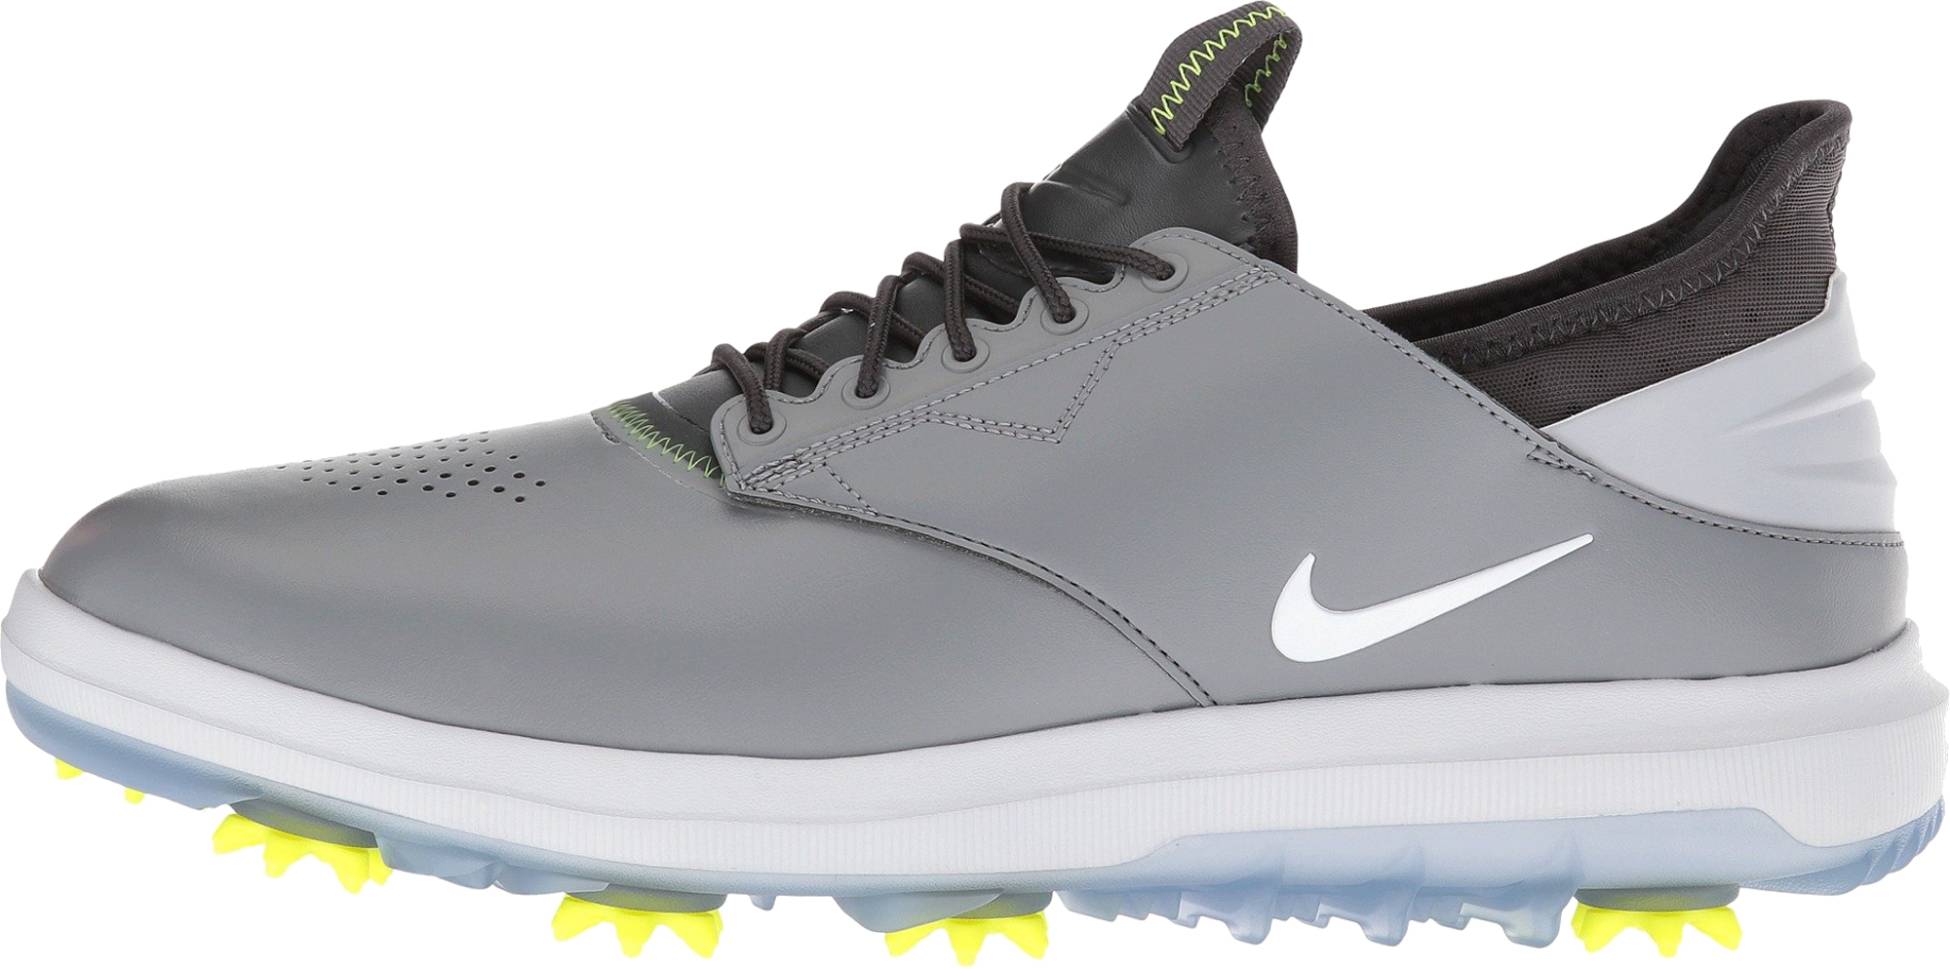 nike air zoom direct golf shoes cool grey